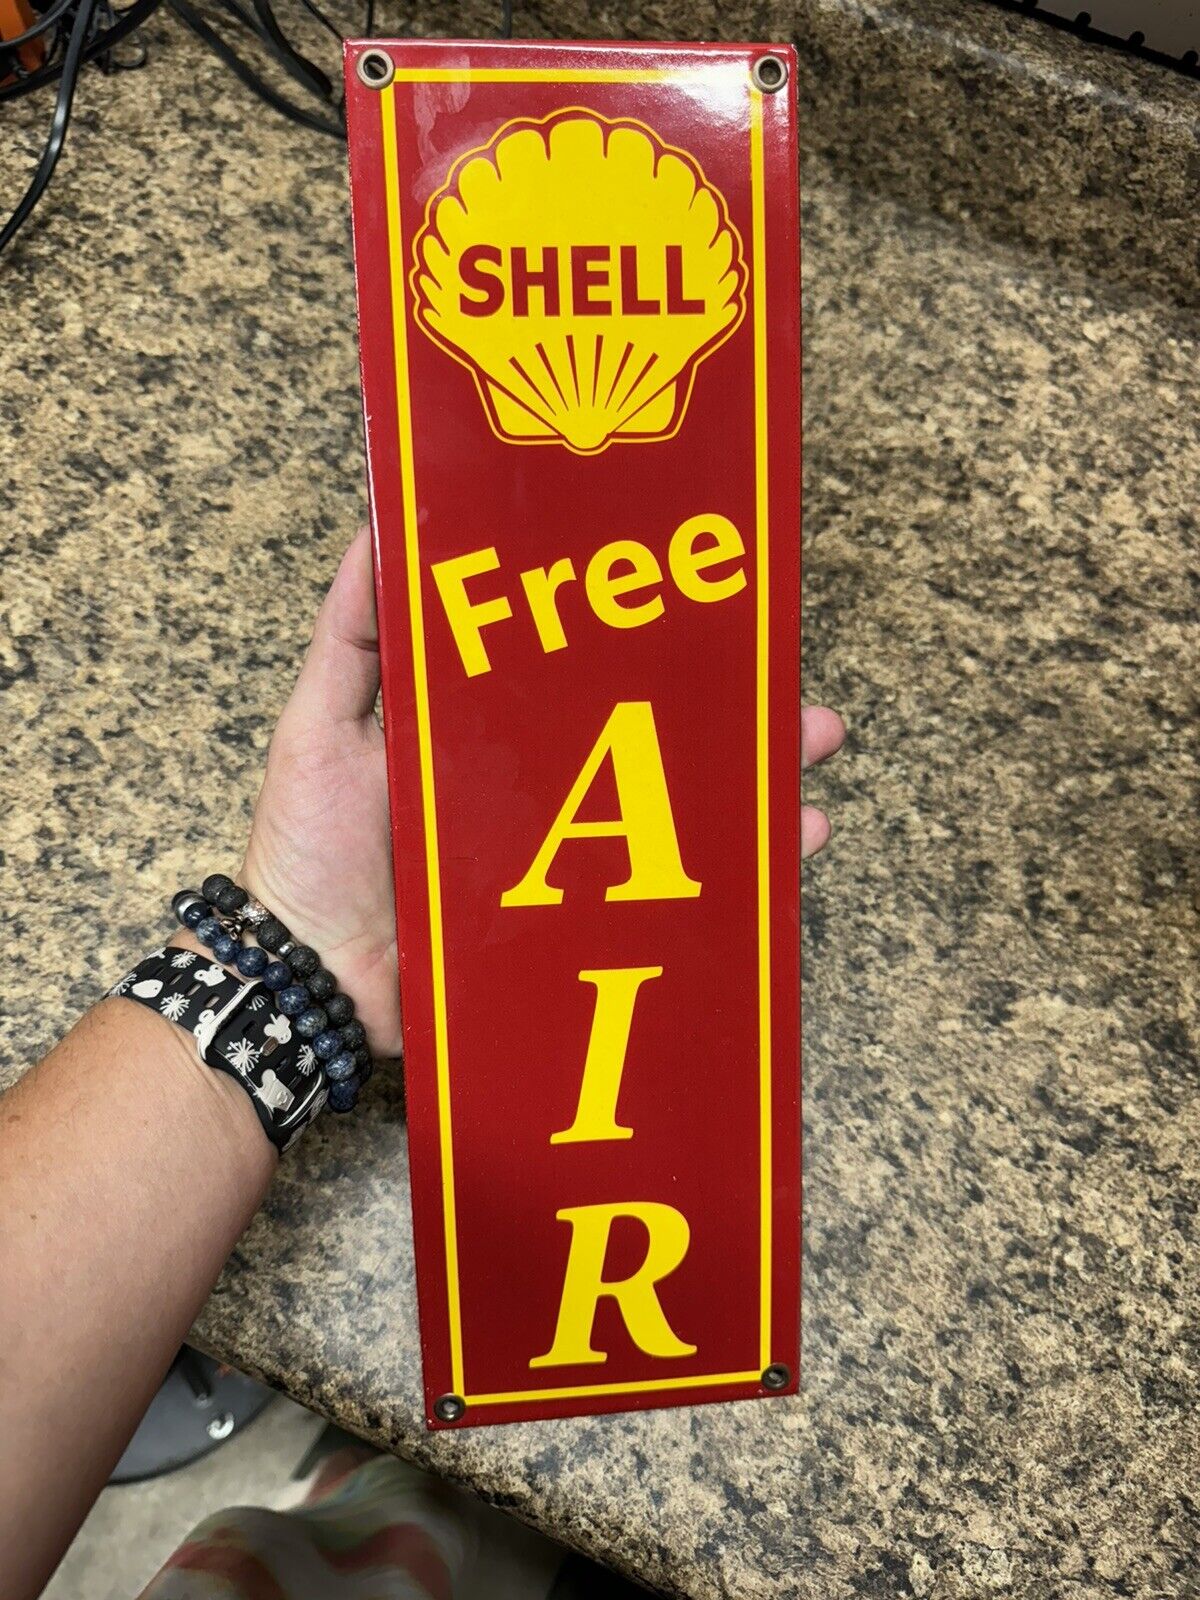 SHELL PORCELAIN FREE AIR PORCELAIN SIGN GAS MOTOR OIL SERVICE STATION PUMP LUBE